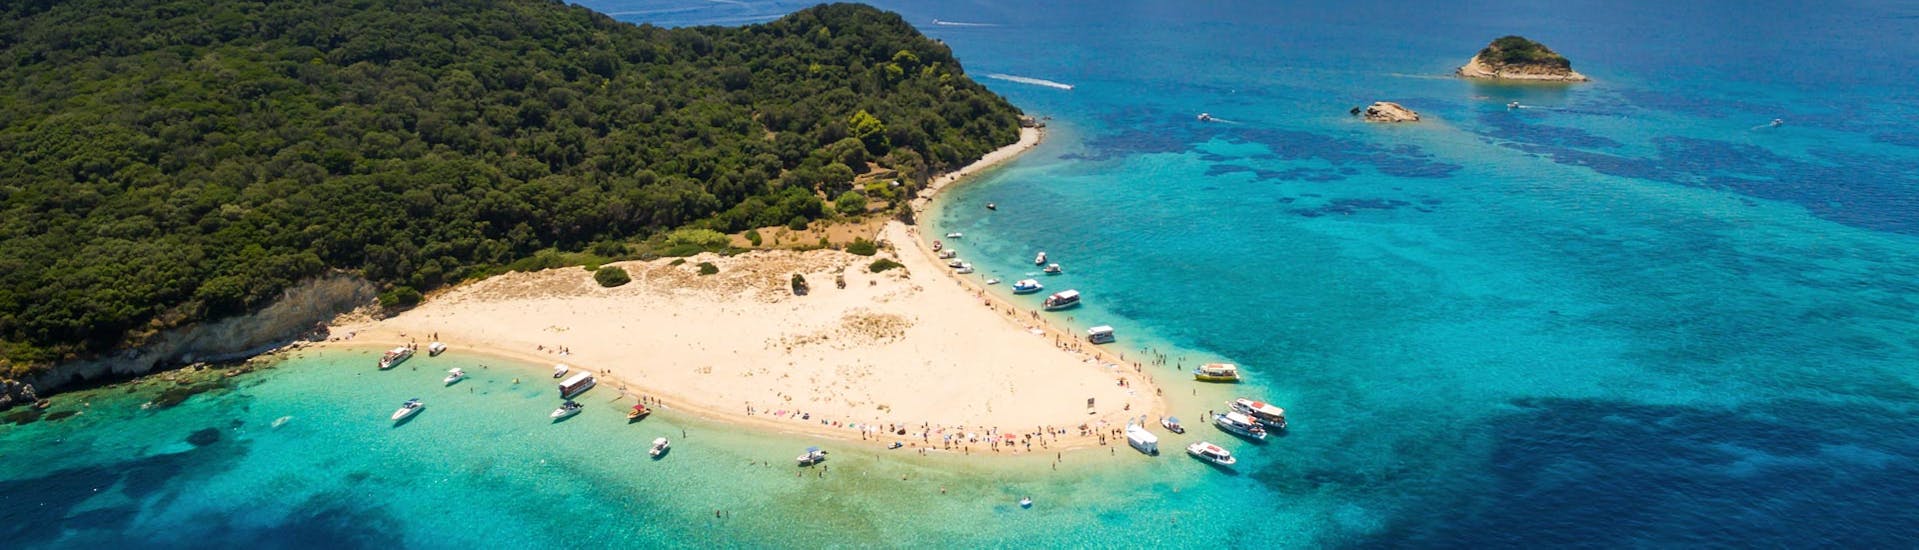 Turtle Island that can be visited with boat hire in Keri (up to 7 people) with Fun@Sea Zakynthos.